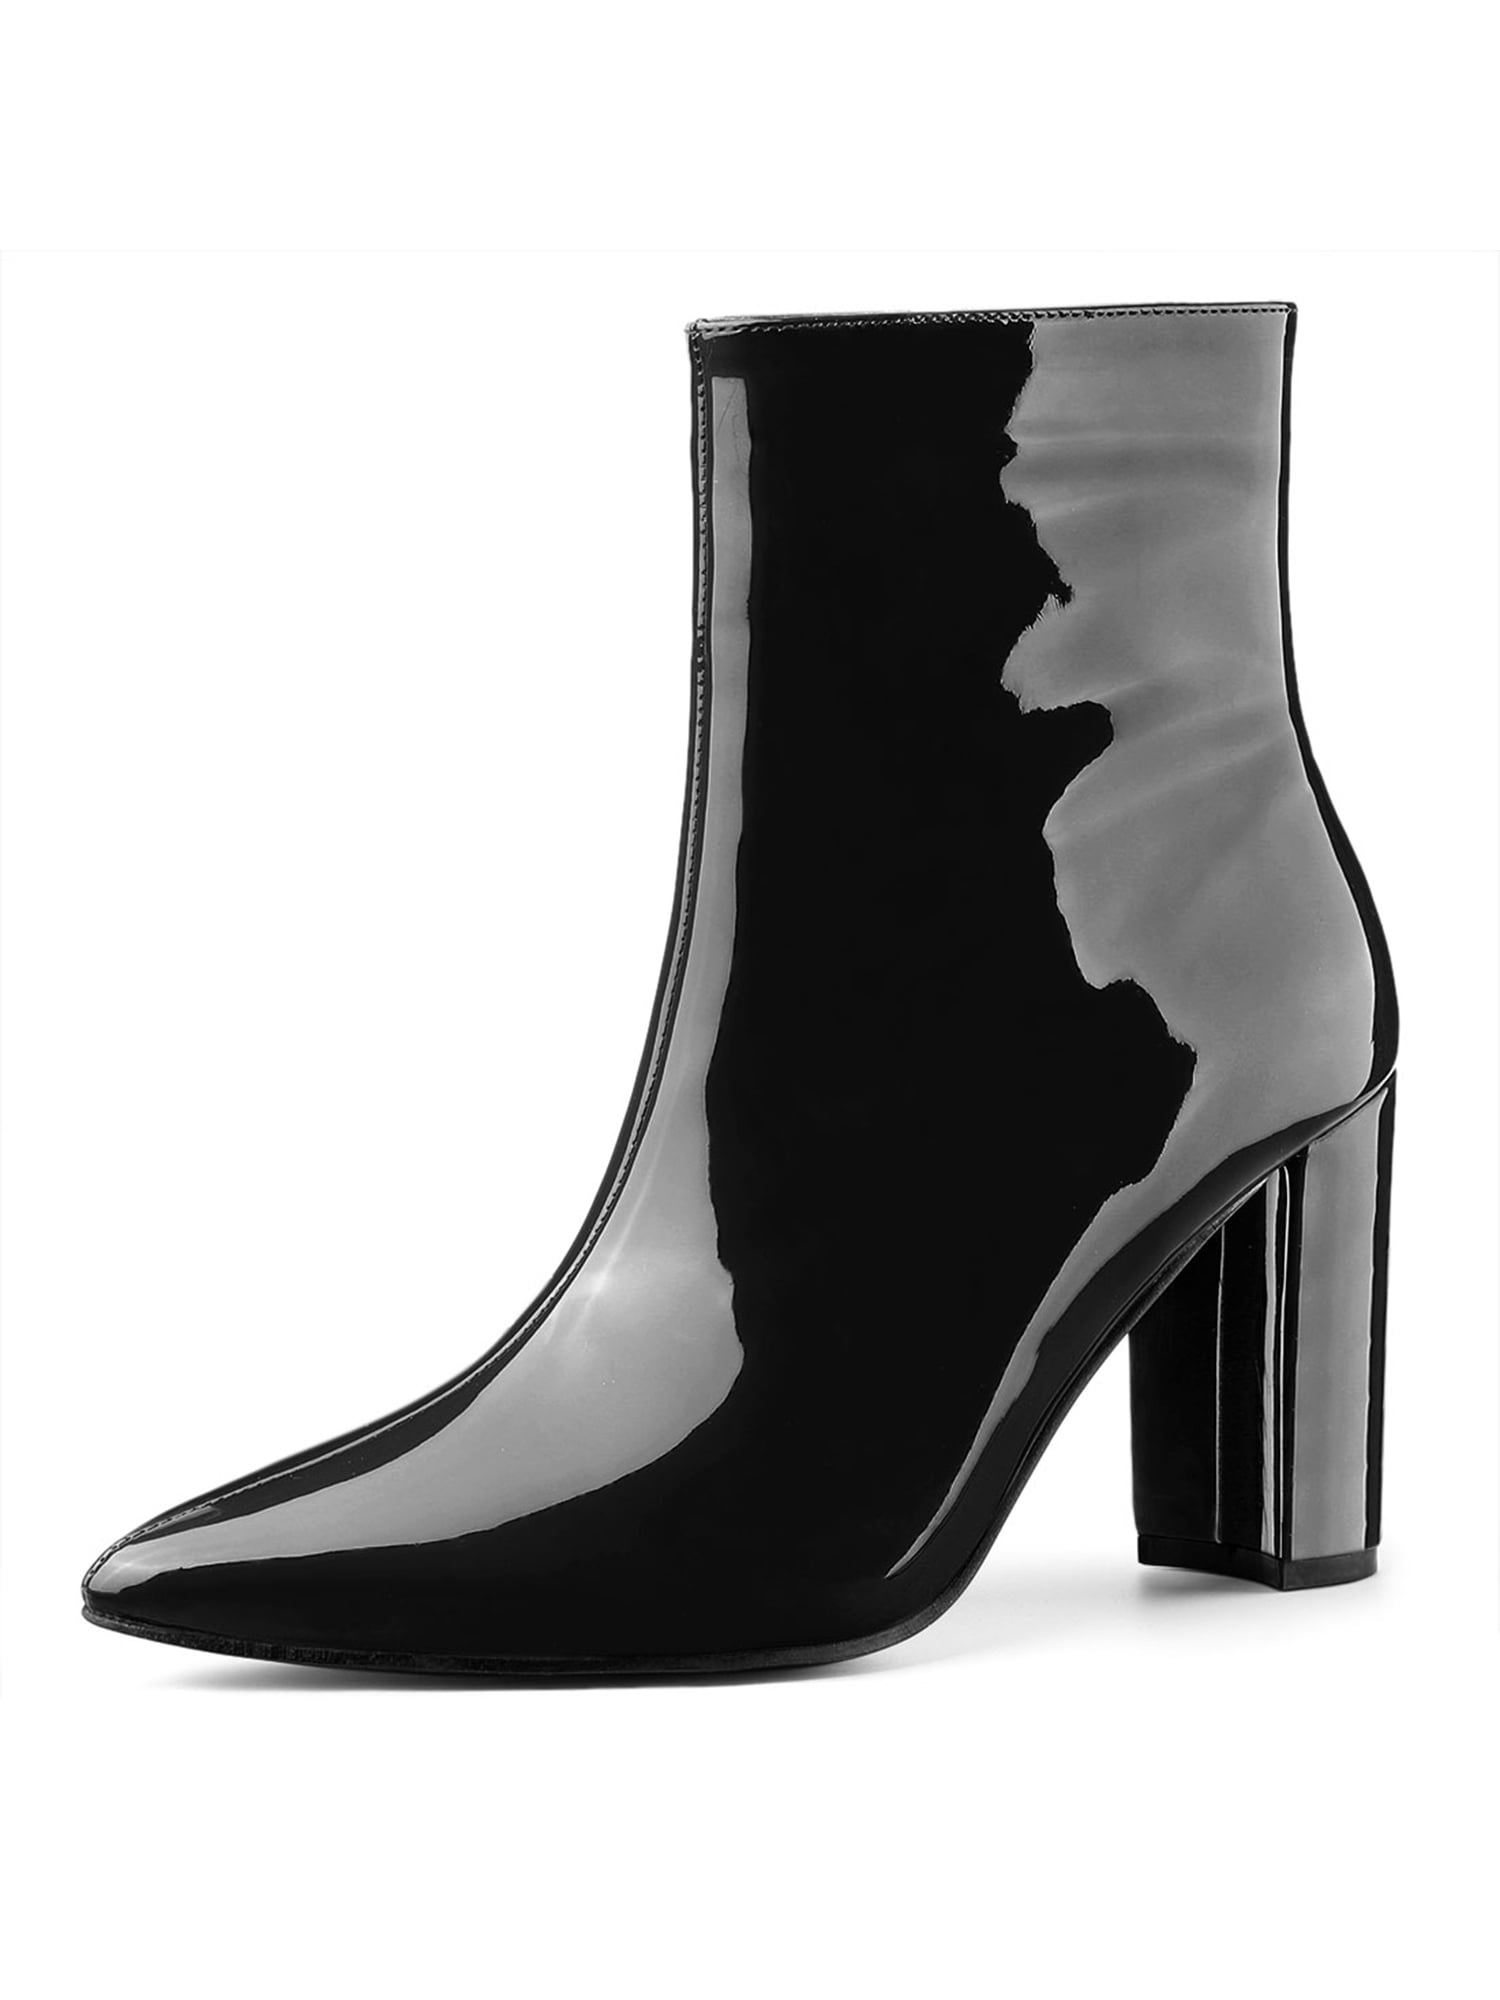 Allegra K Women's Pointed Toe Zipper Patent Leather Ankle Chunky Boots ...